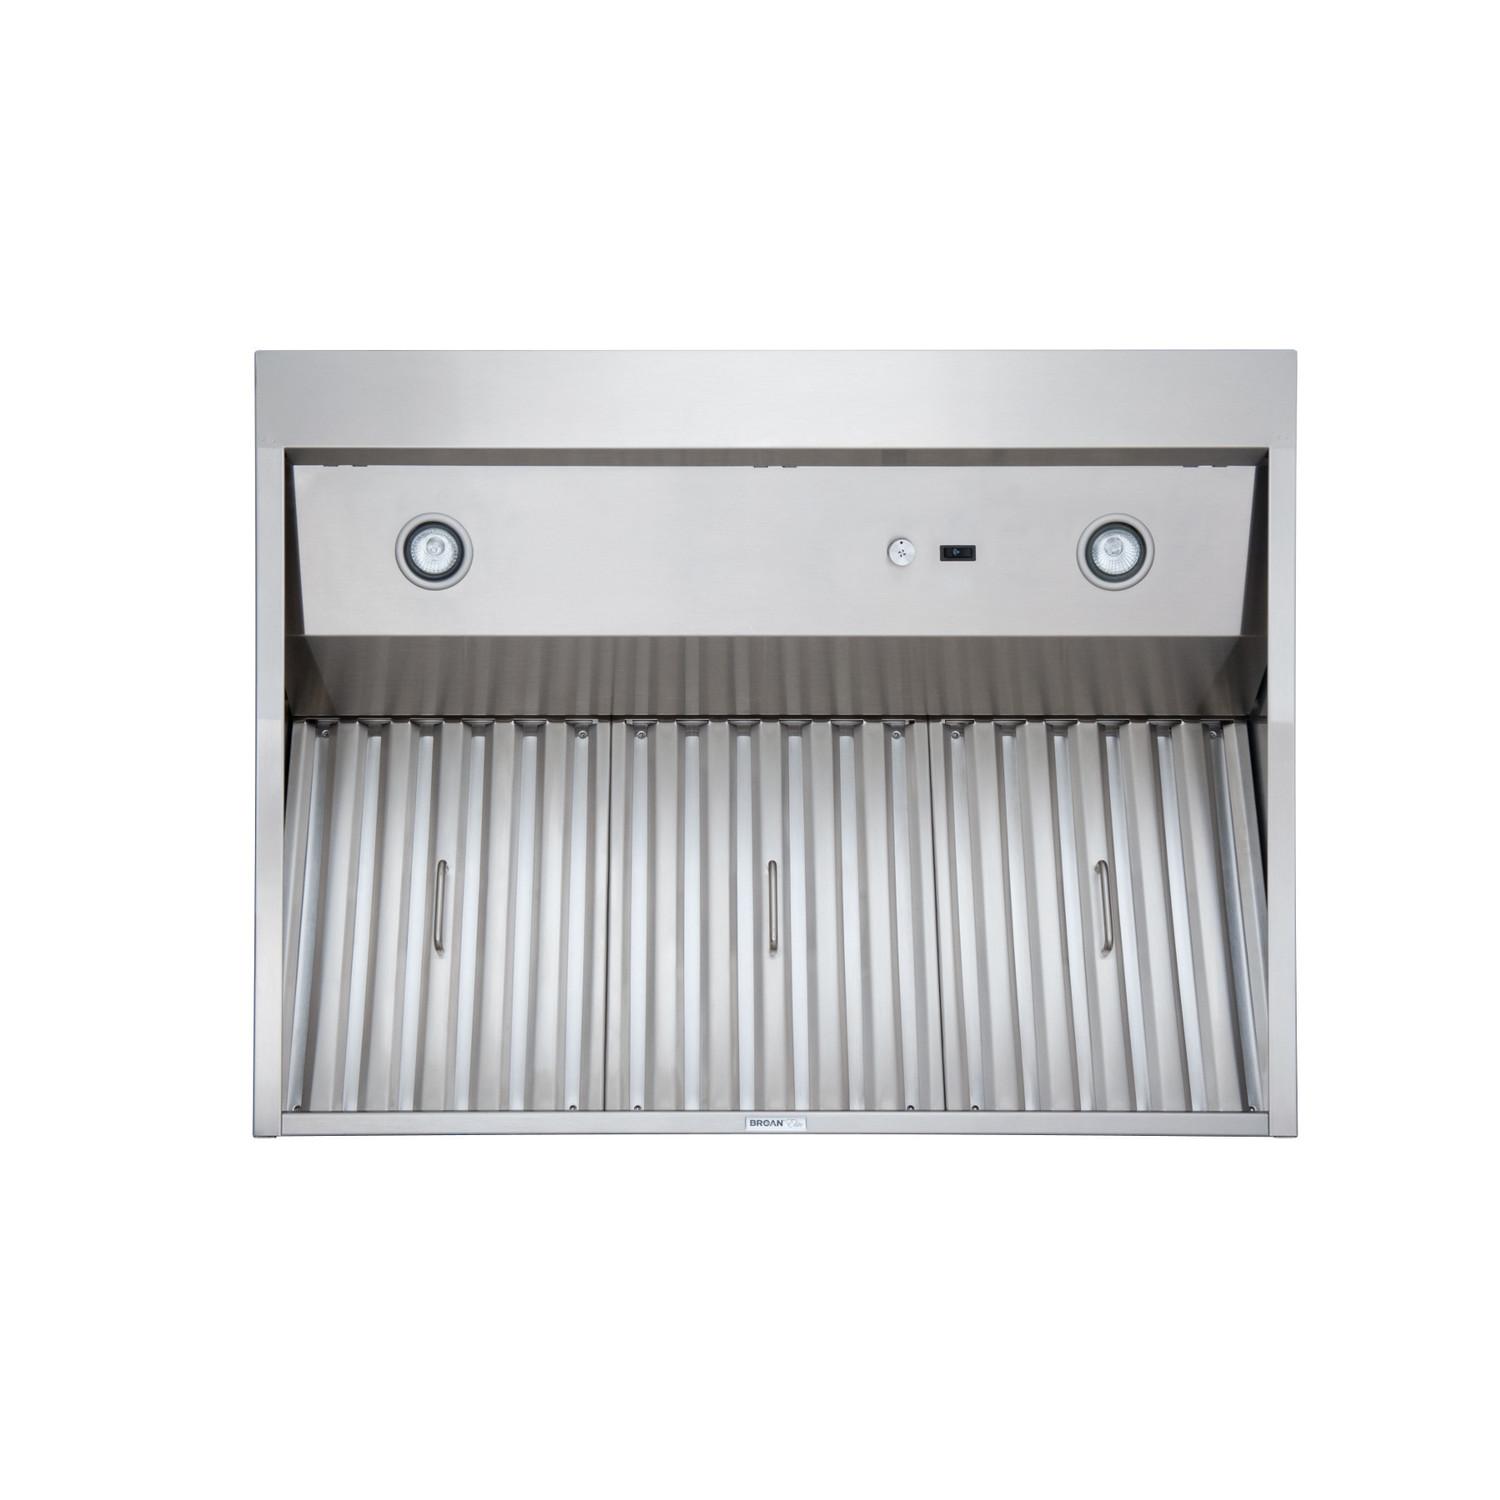 Broan® EPD61 Series 36-inch Pro-Style Outdoor Range Hood, 1290 Max Blower CFM, Stainless Steel